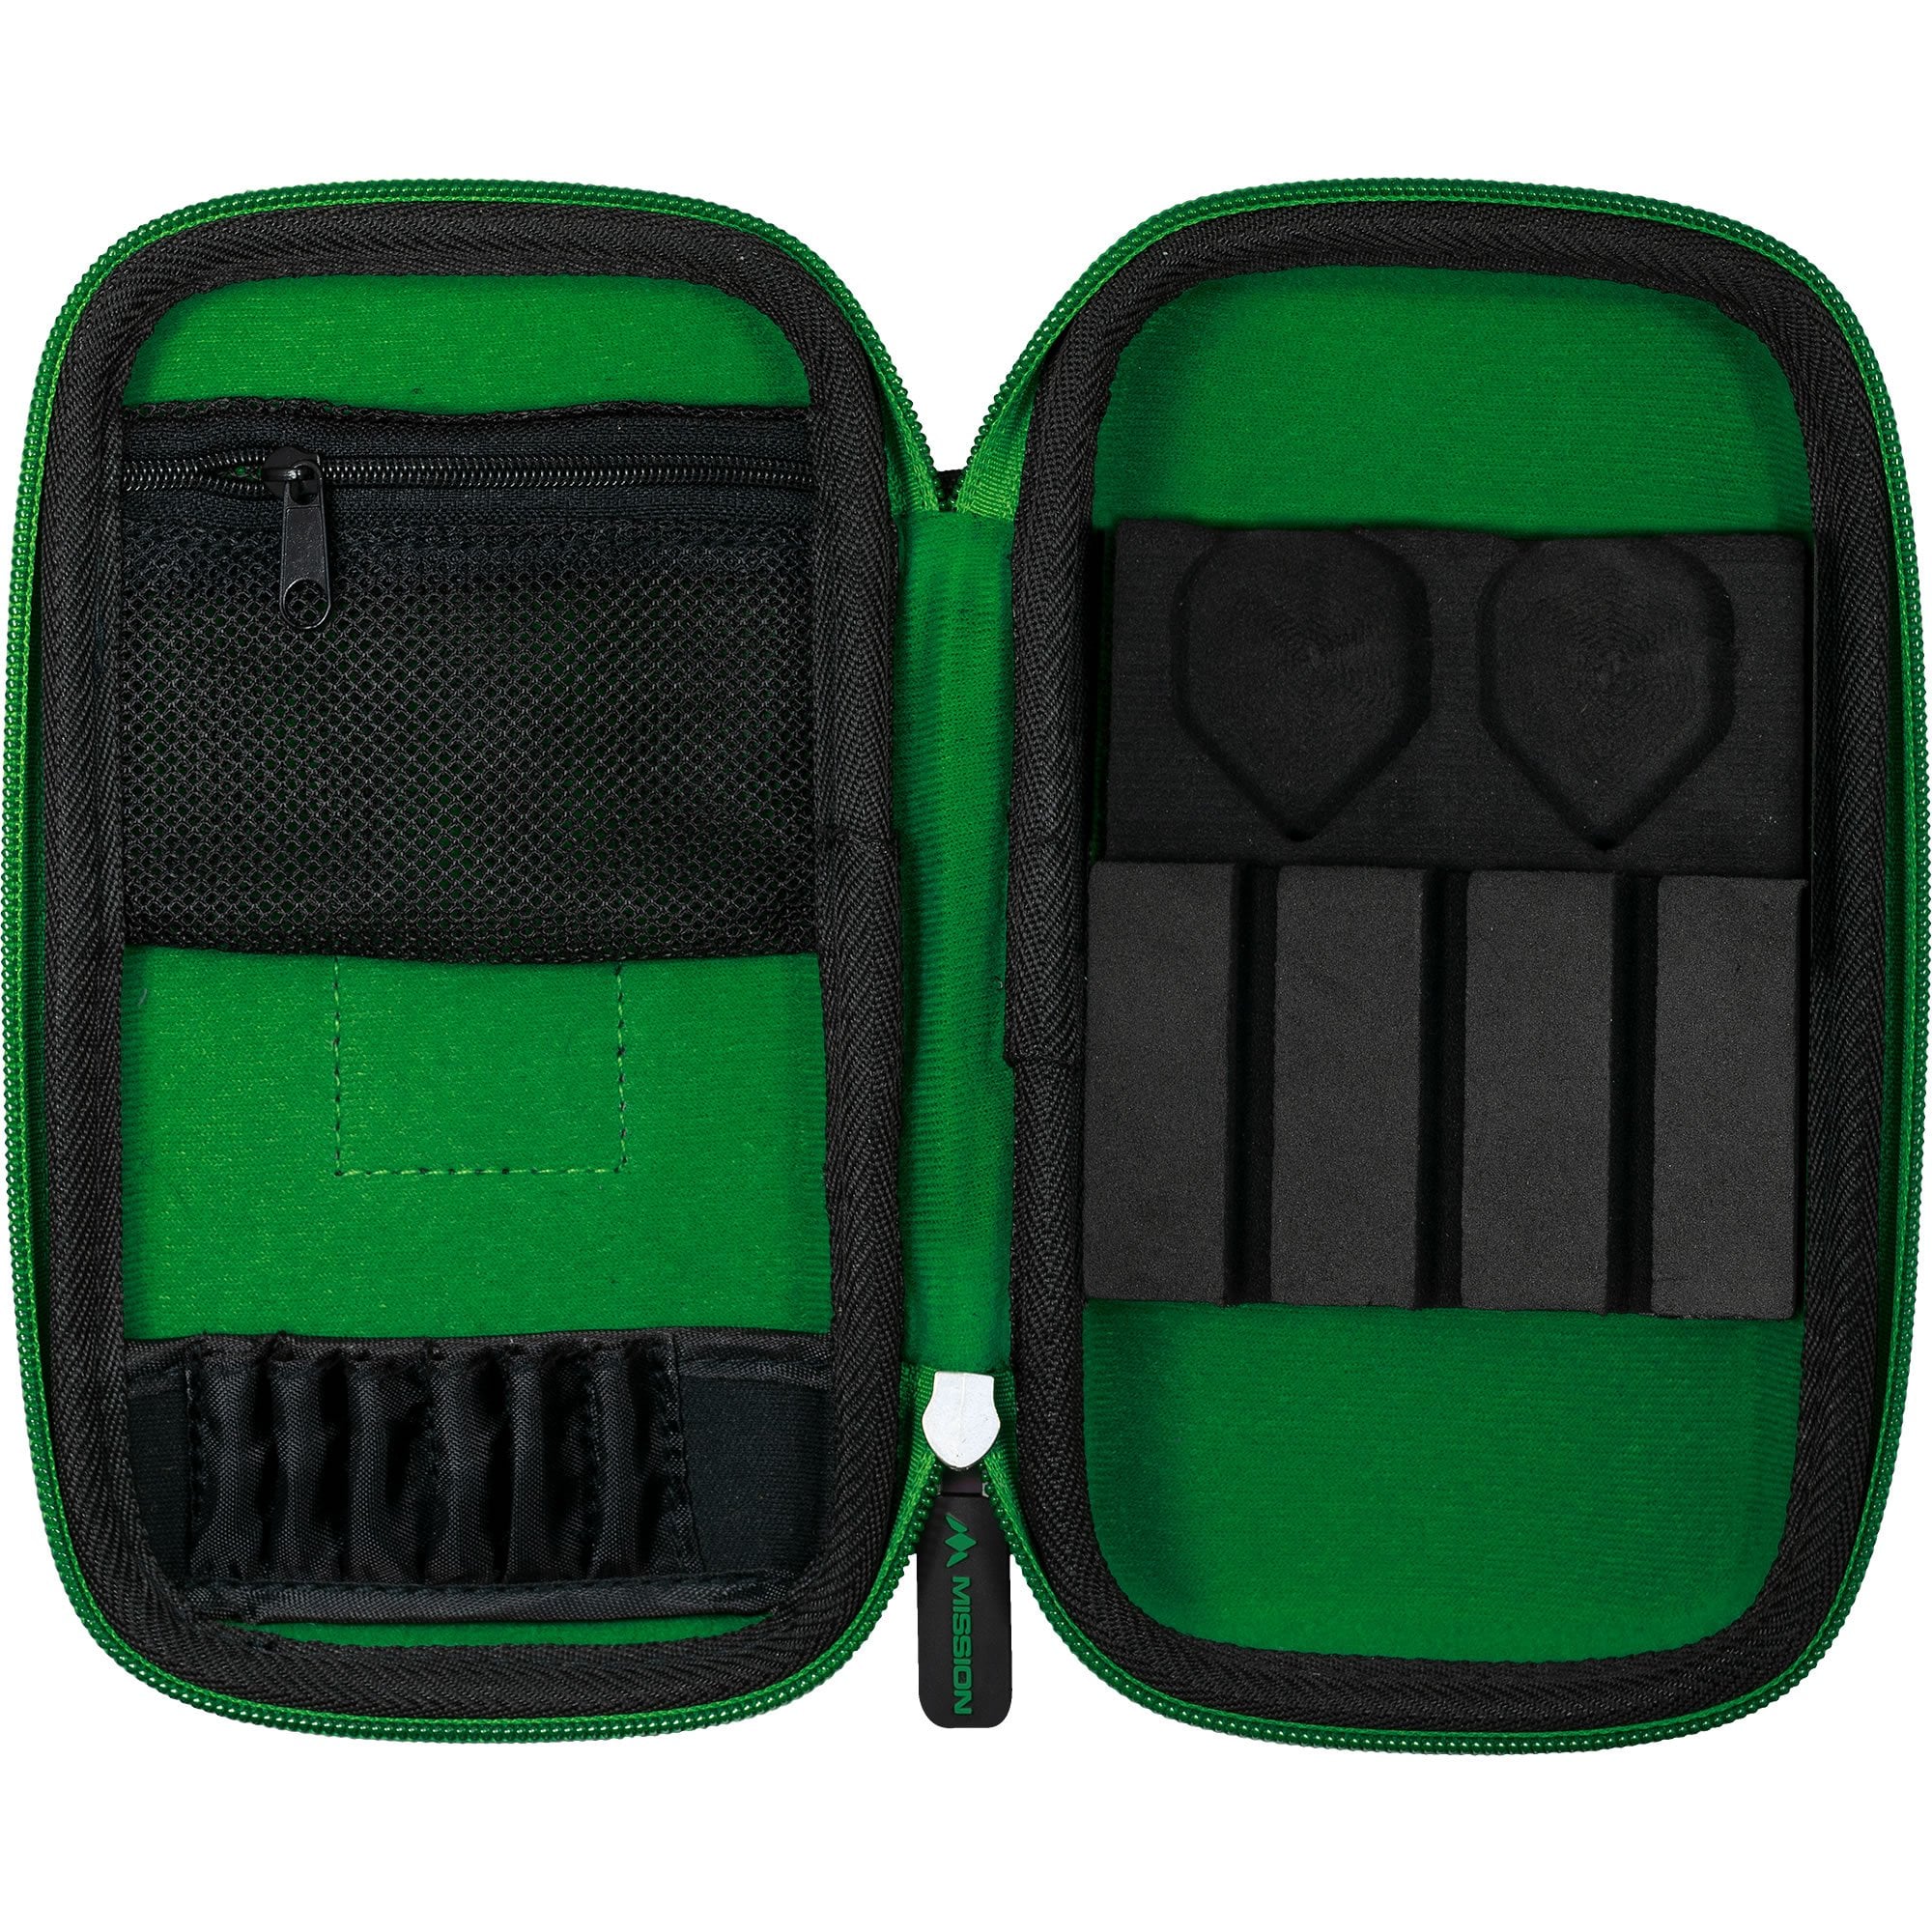 Mission Freedom XL Darts Case - Strong Protection